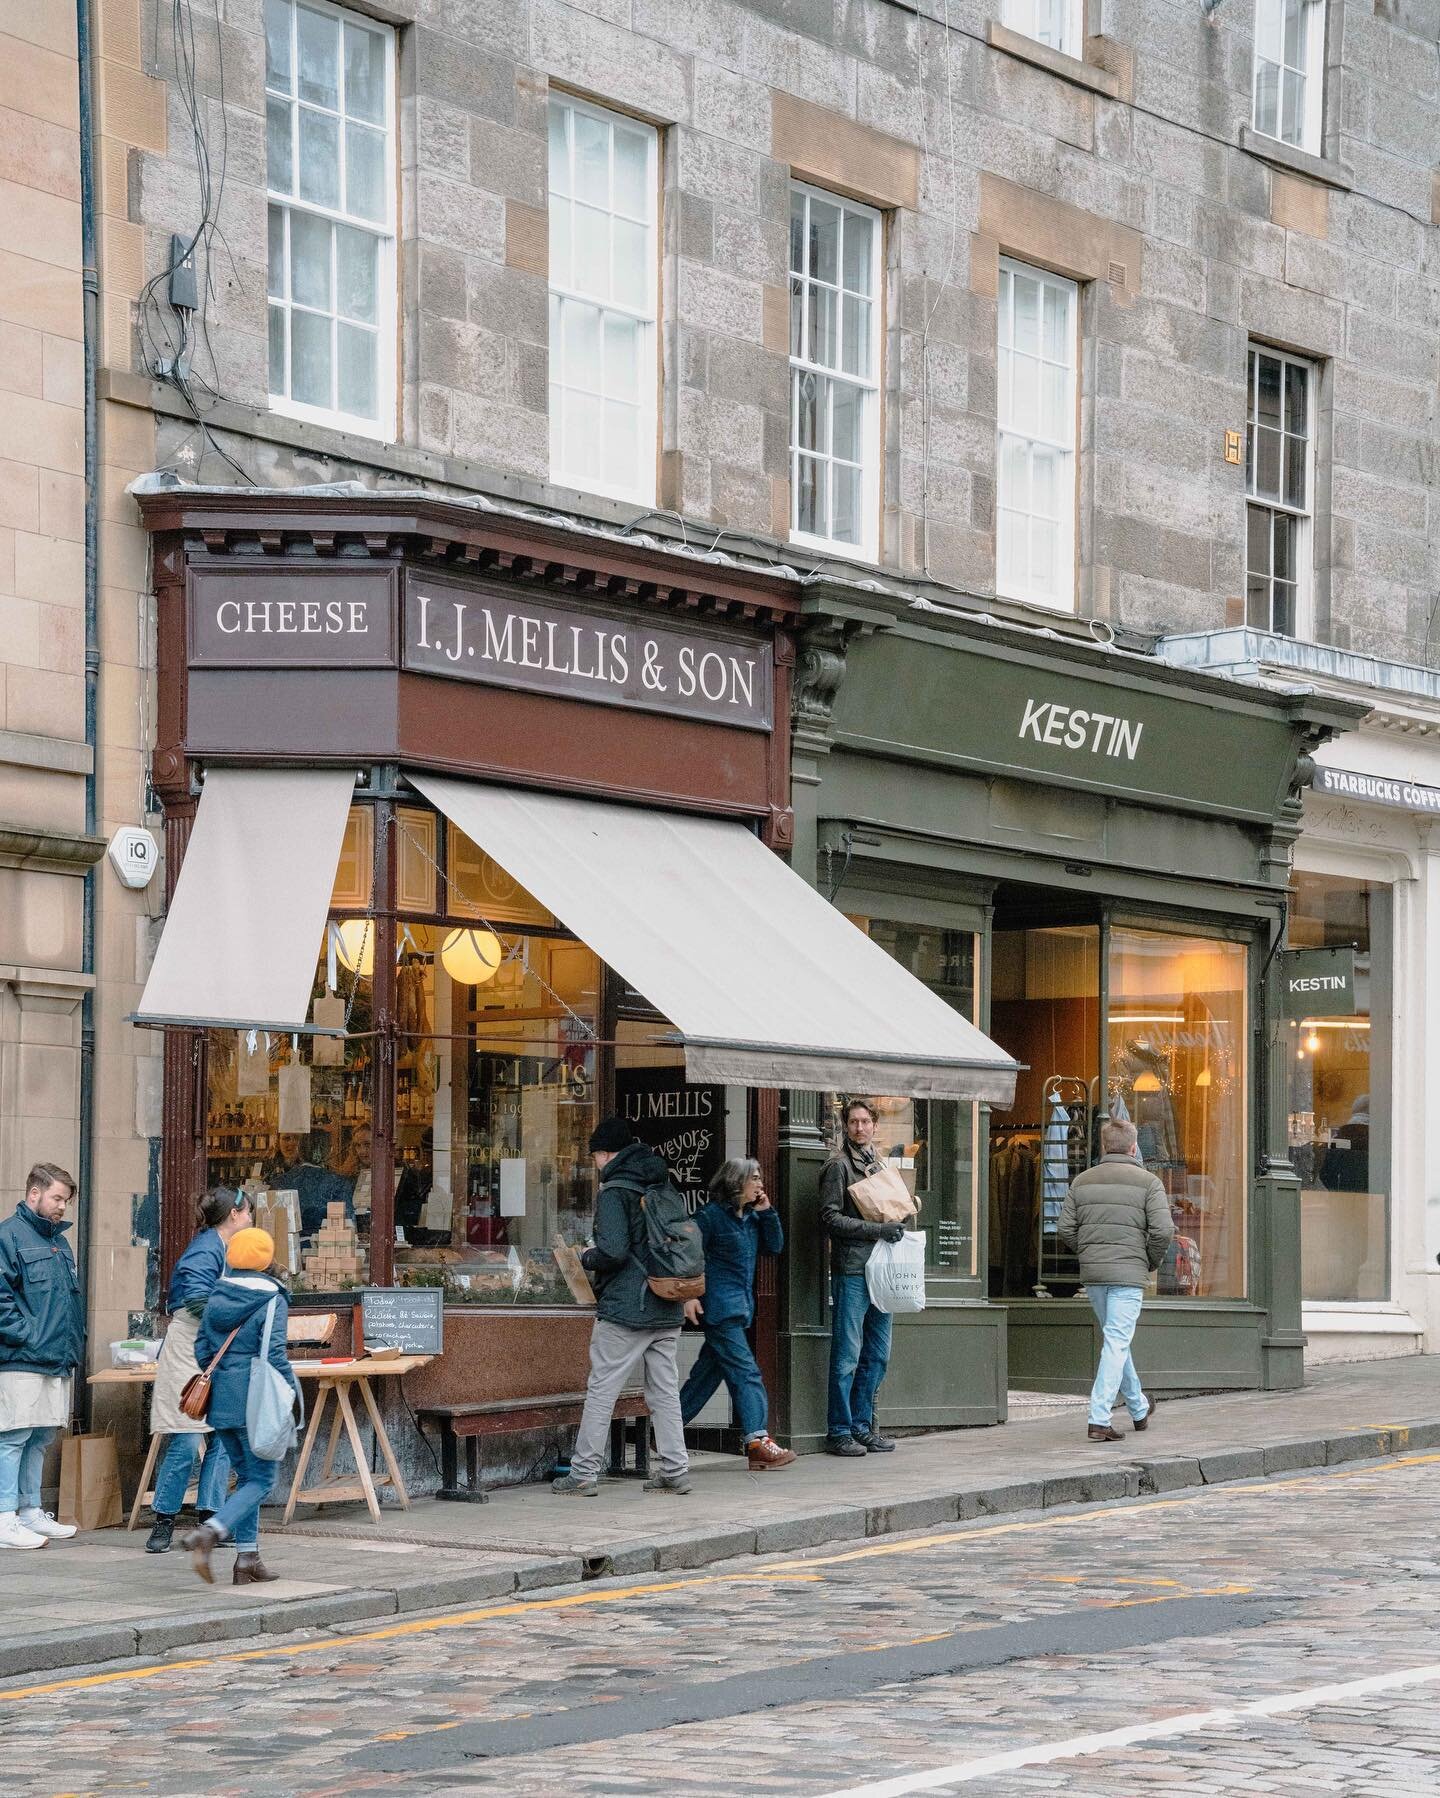 These two gorgeous shops sit on one of Edinburgh&rsquo;s loveliest streets (Kerr St.) It was so alive and bustling just before New Year&rsquo;s Eve. After all no party is complete without the cheese course.